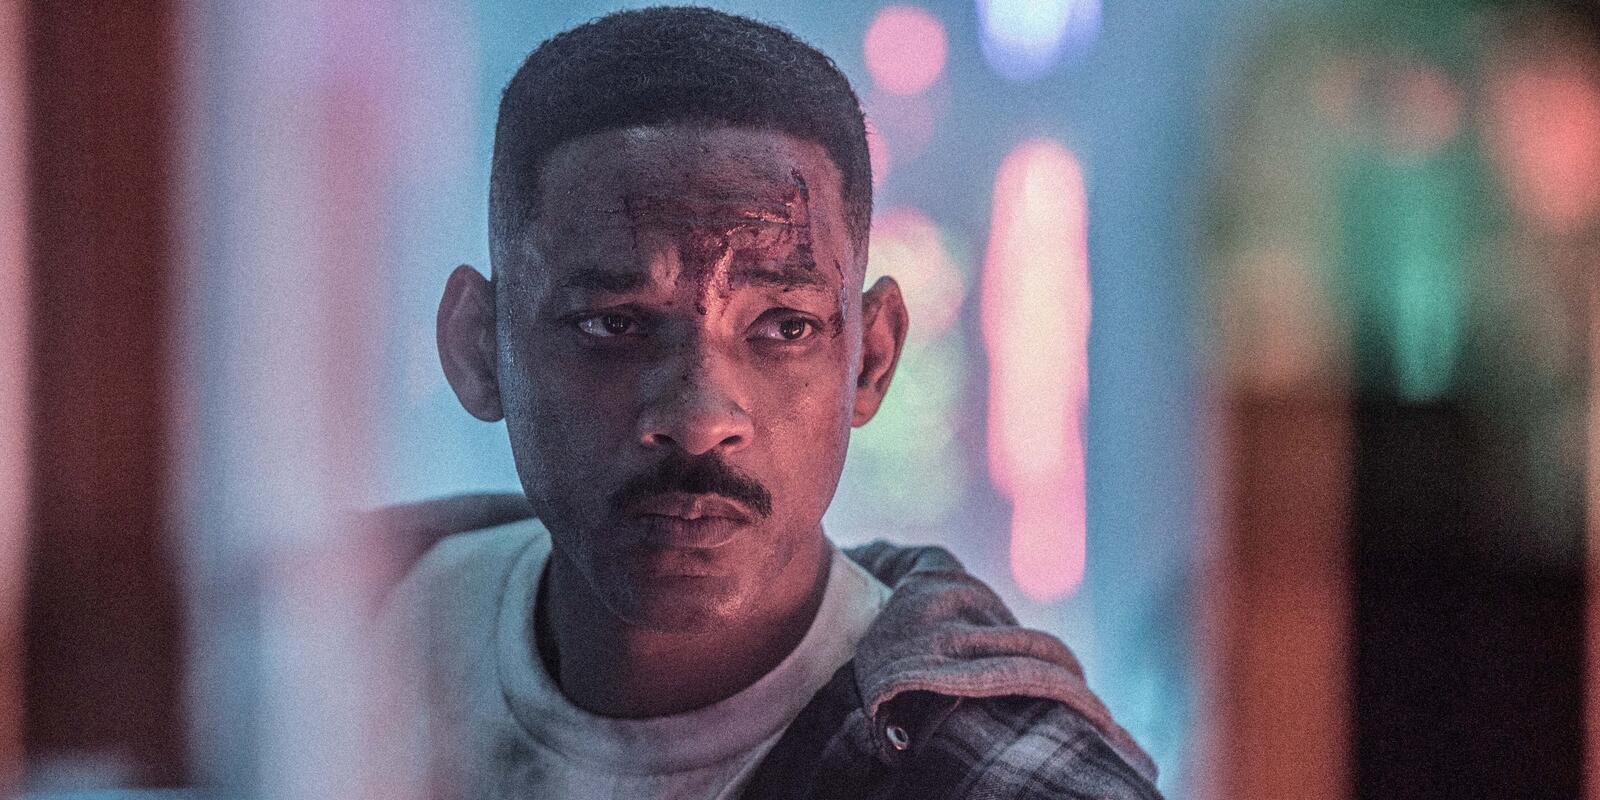 Wallpapers bright Will Smith 2017 Movies on the desktop